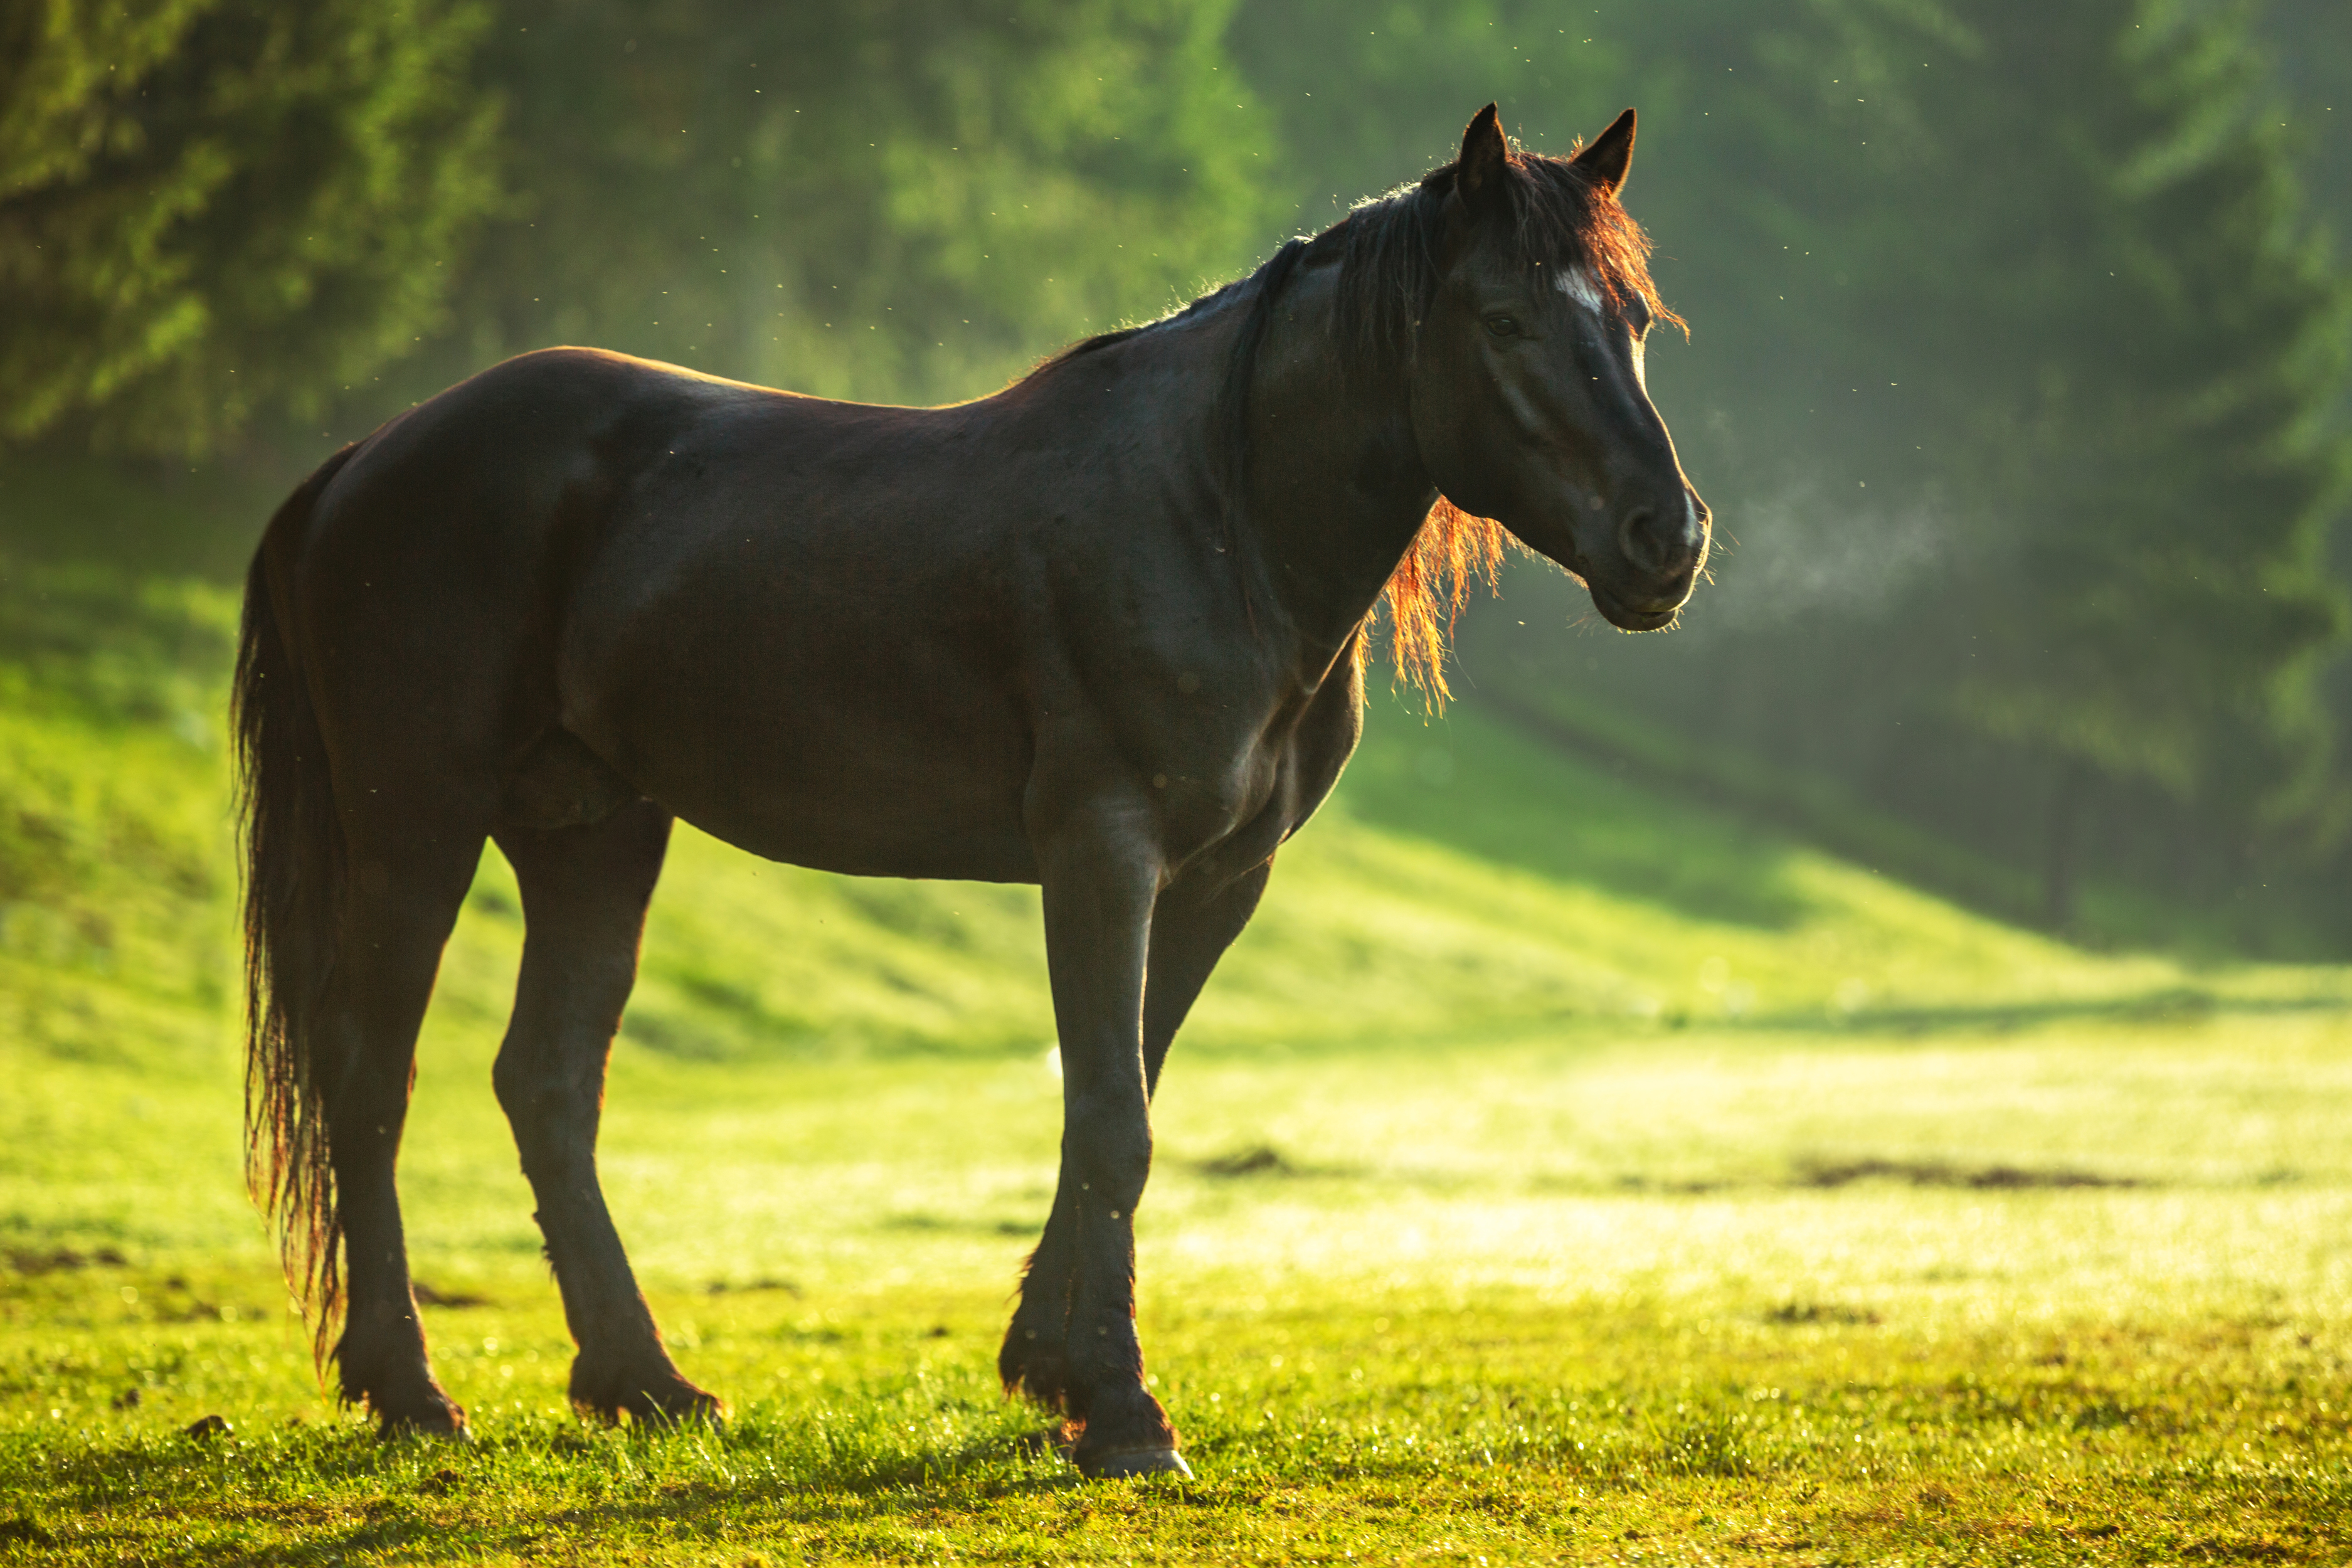 Wallpapers horse morning field on the desktop